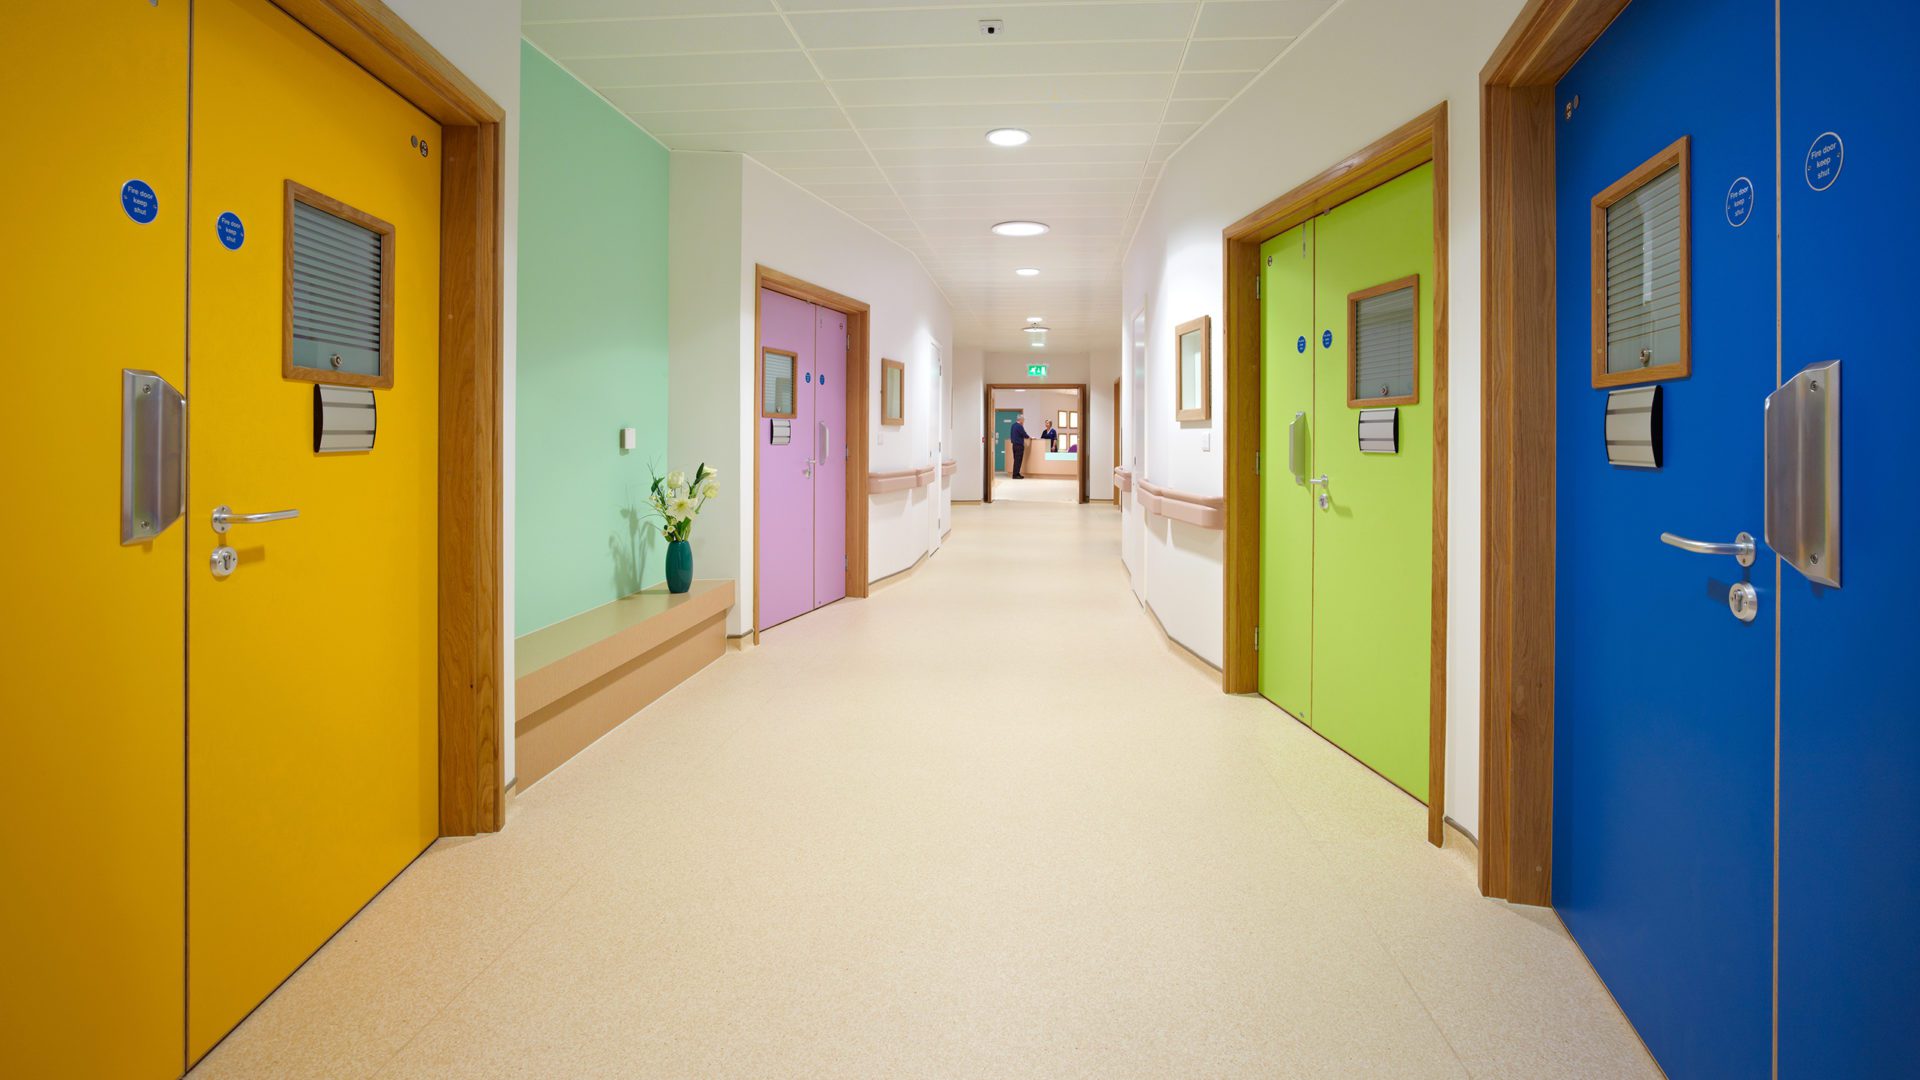 Midpark Hospital Interior of hallways and colorful doors